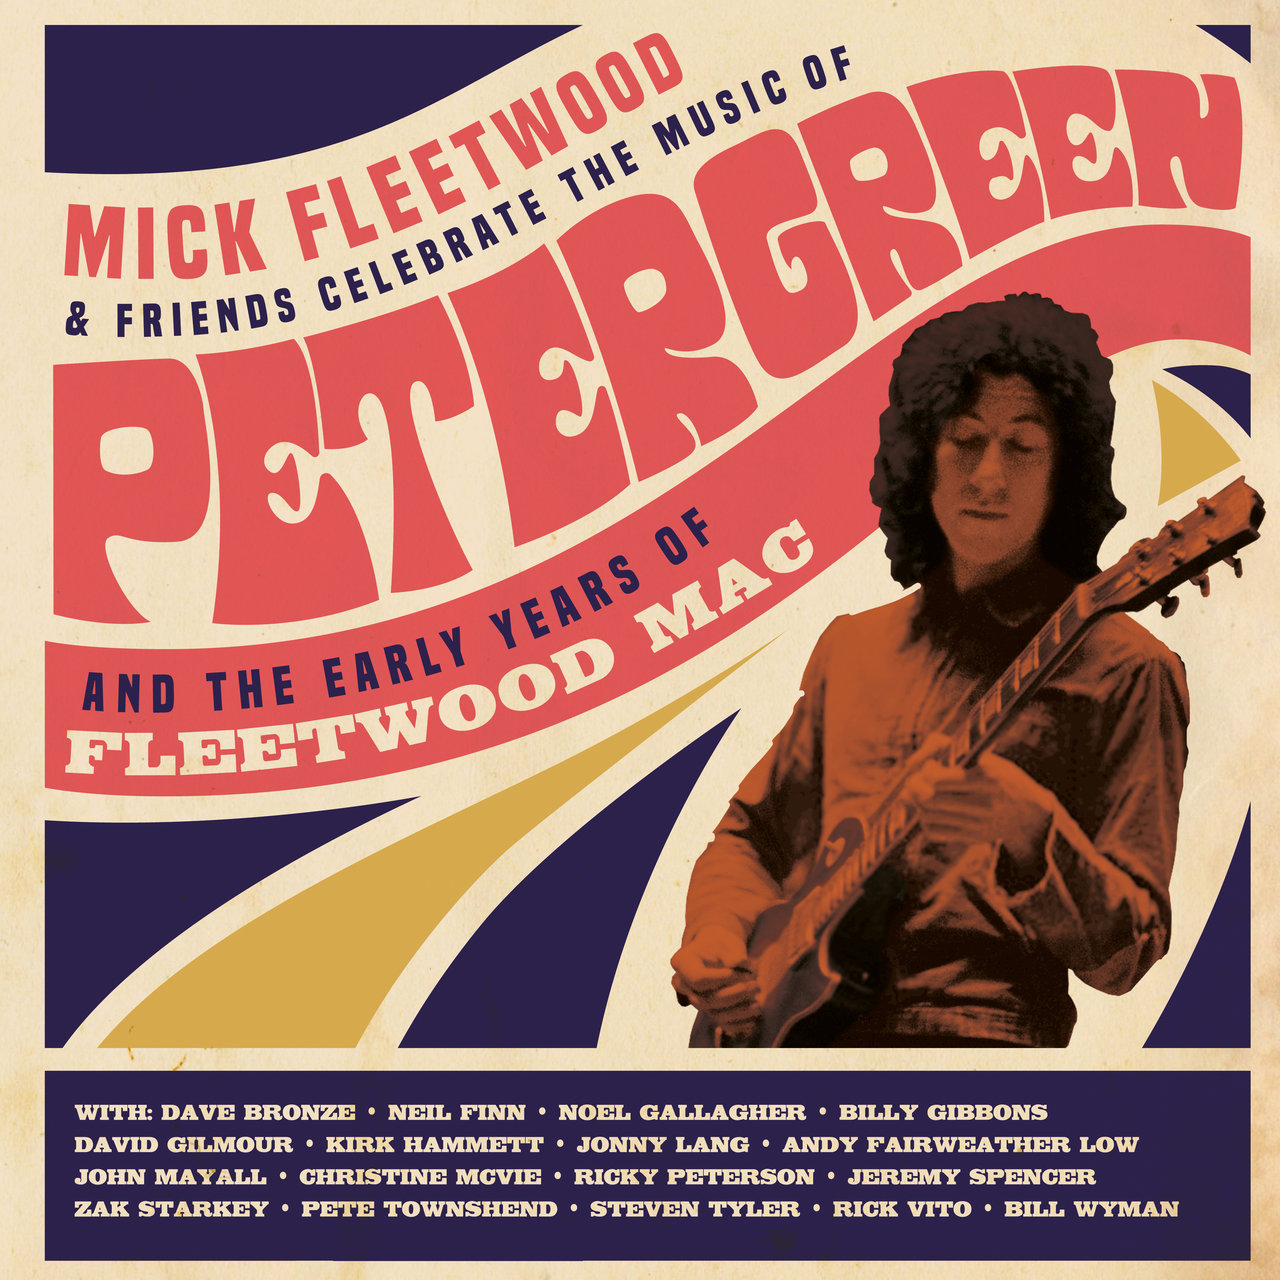 Mick Fleetwood and Friends - Celebrate the Music of Peter Green and the Early Years of Fleetwood Mac (Live from The London Palladium) (2021) [Qobuz 24bit/48kHz]